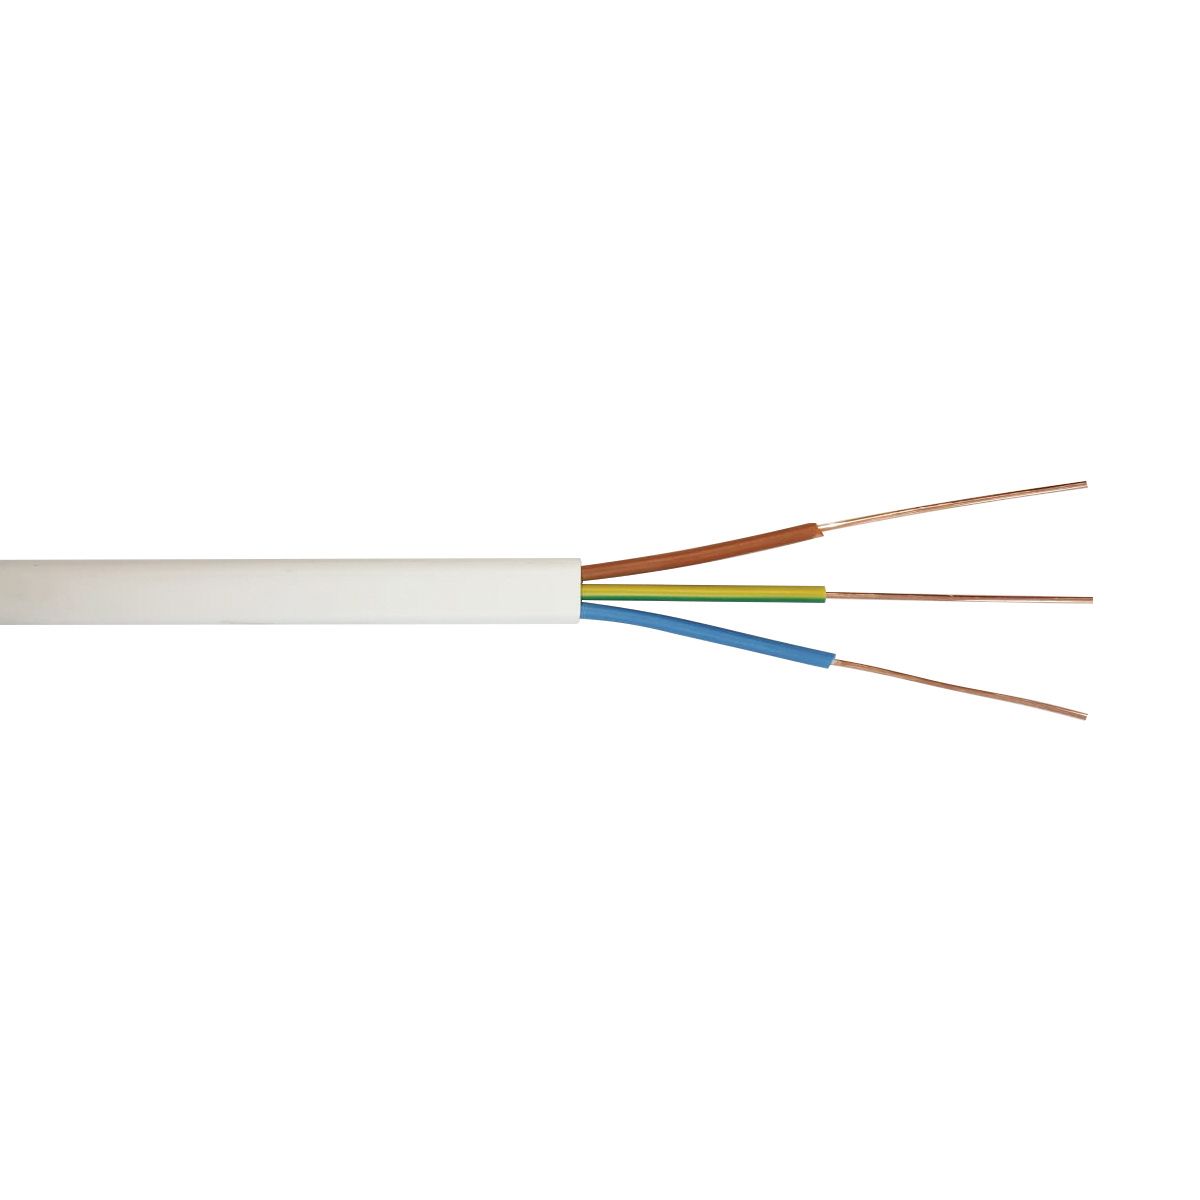 Time 6193B White 3-core Cable 6mm² x 25m